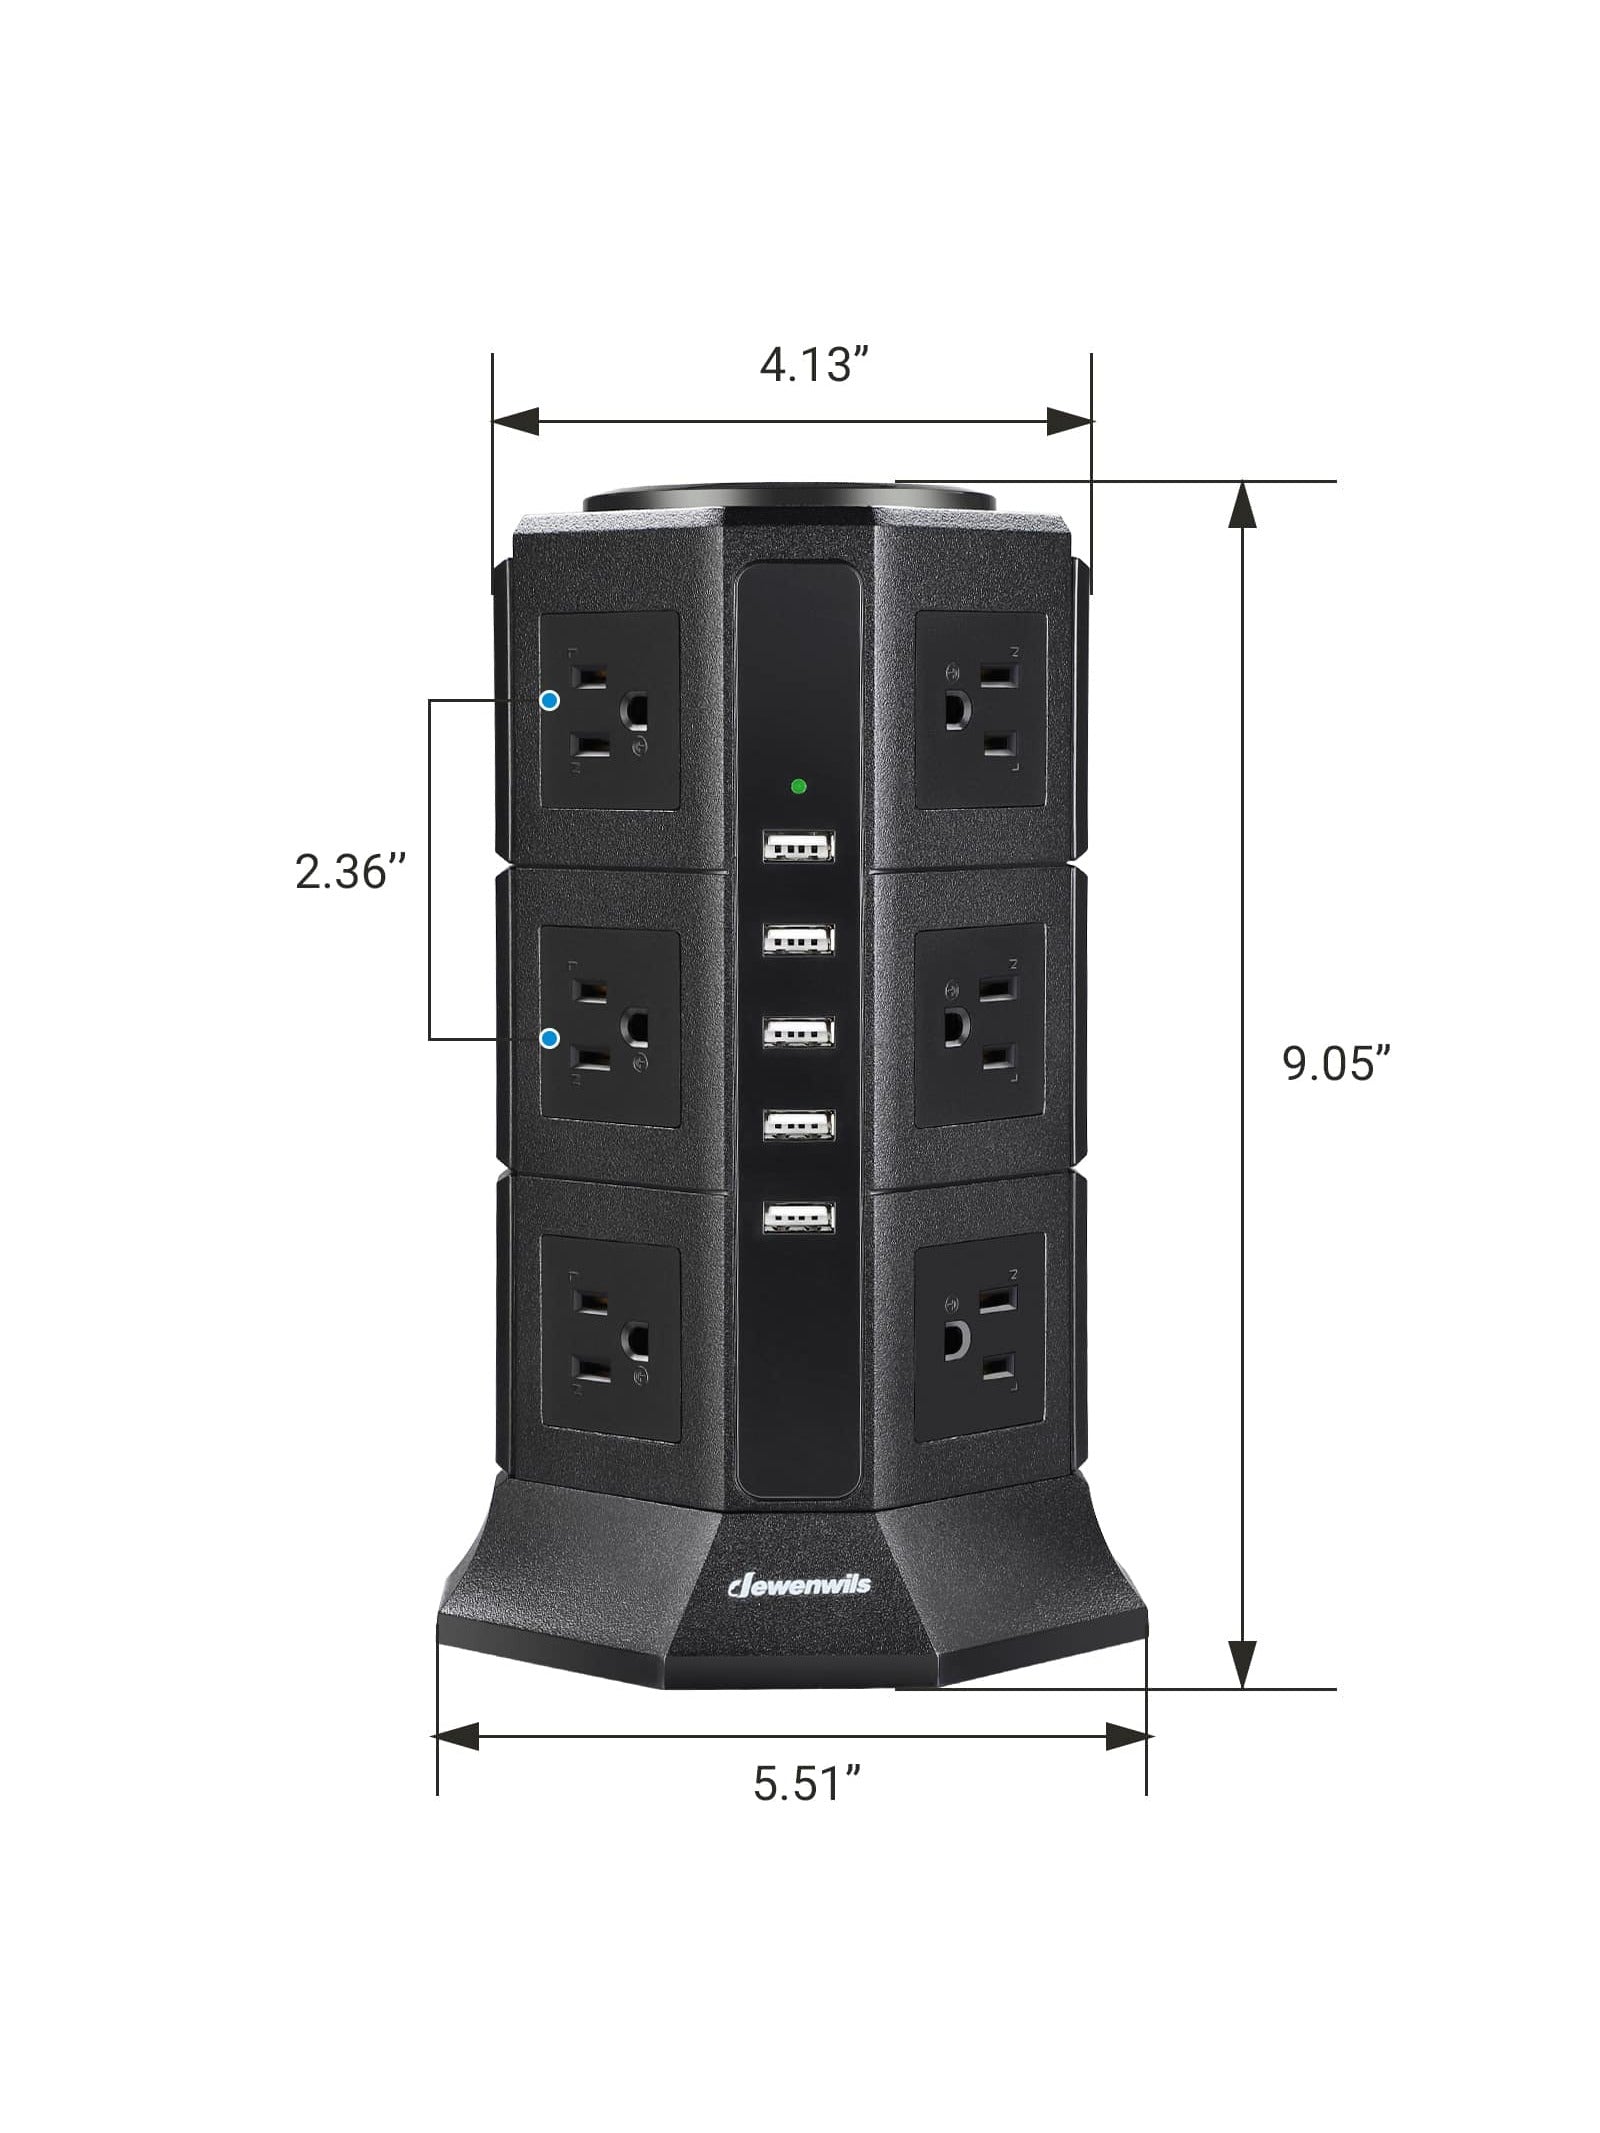 16FT Power Strip Tower, 12-Outlet Surge Protector Power Strip with 5-USB Ports, 2-Switch Control, 15A Circuit Breaker, 1500Joules